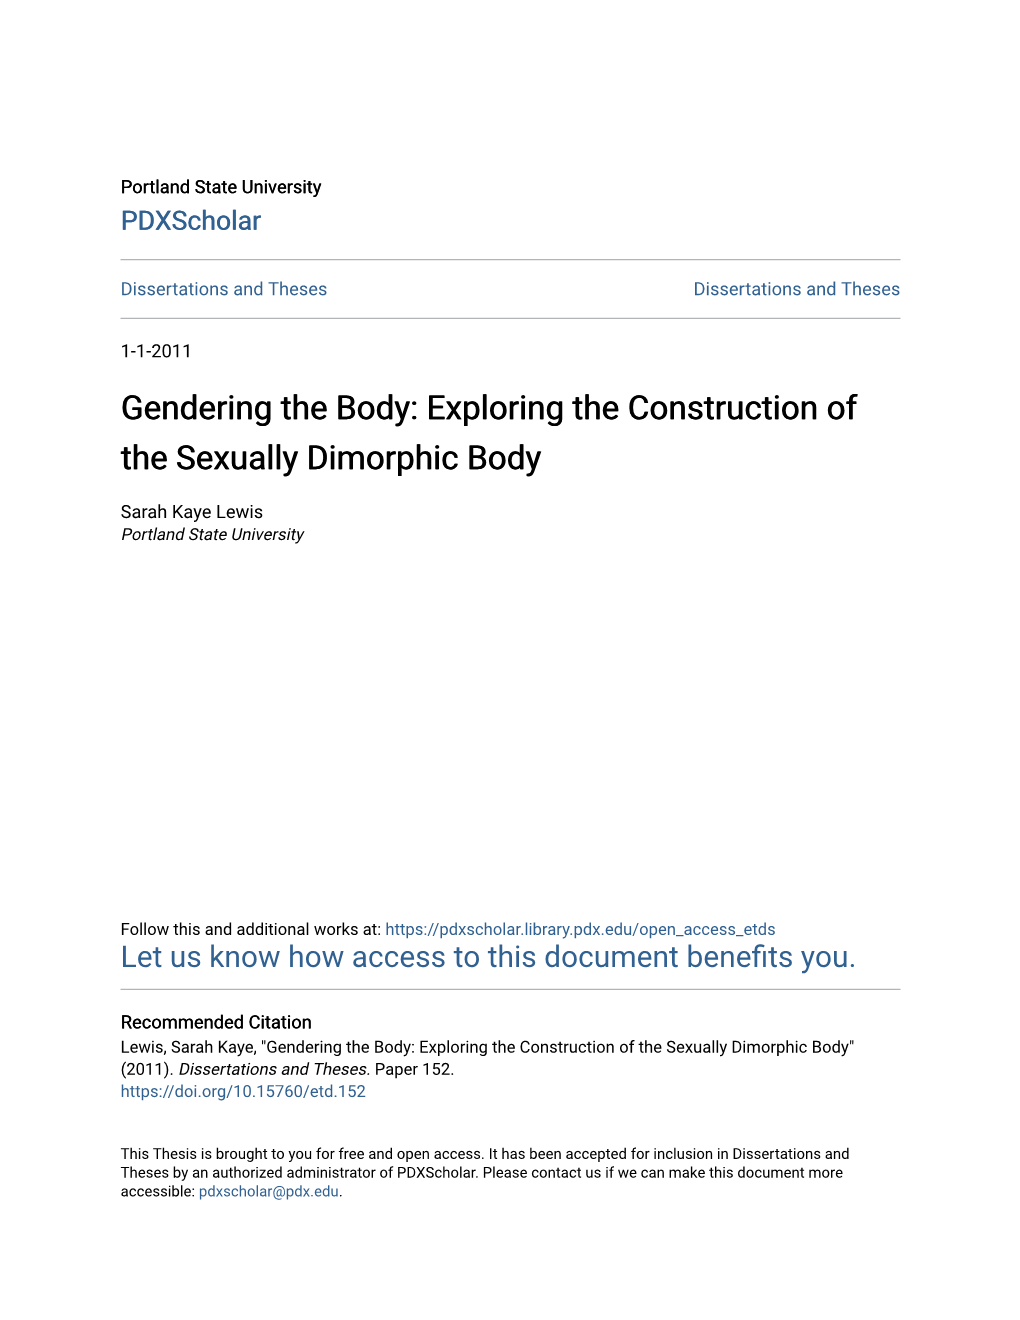 Exploring the Construction of the Sexually Dimorphic Body